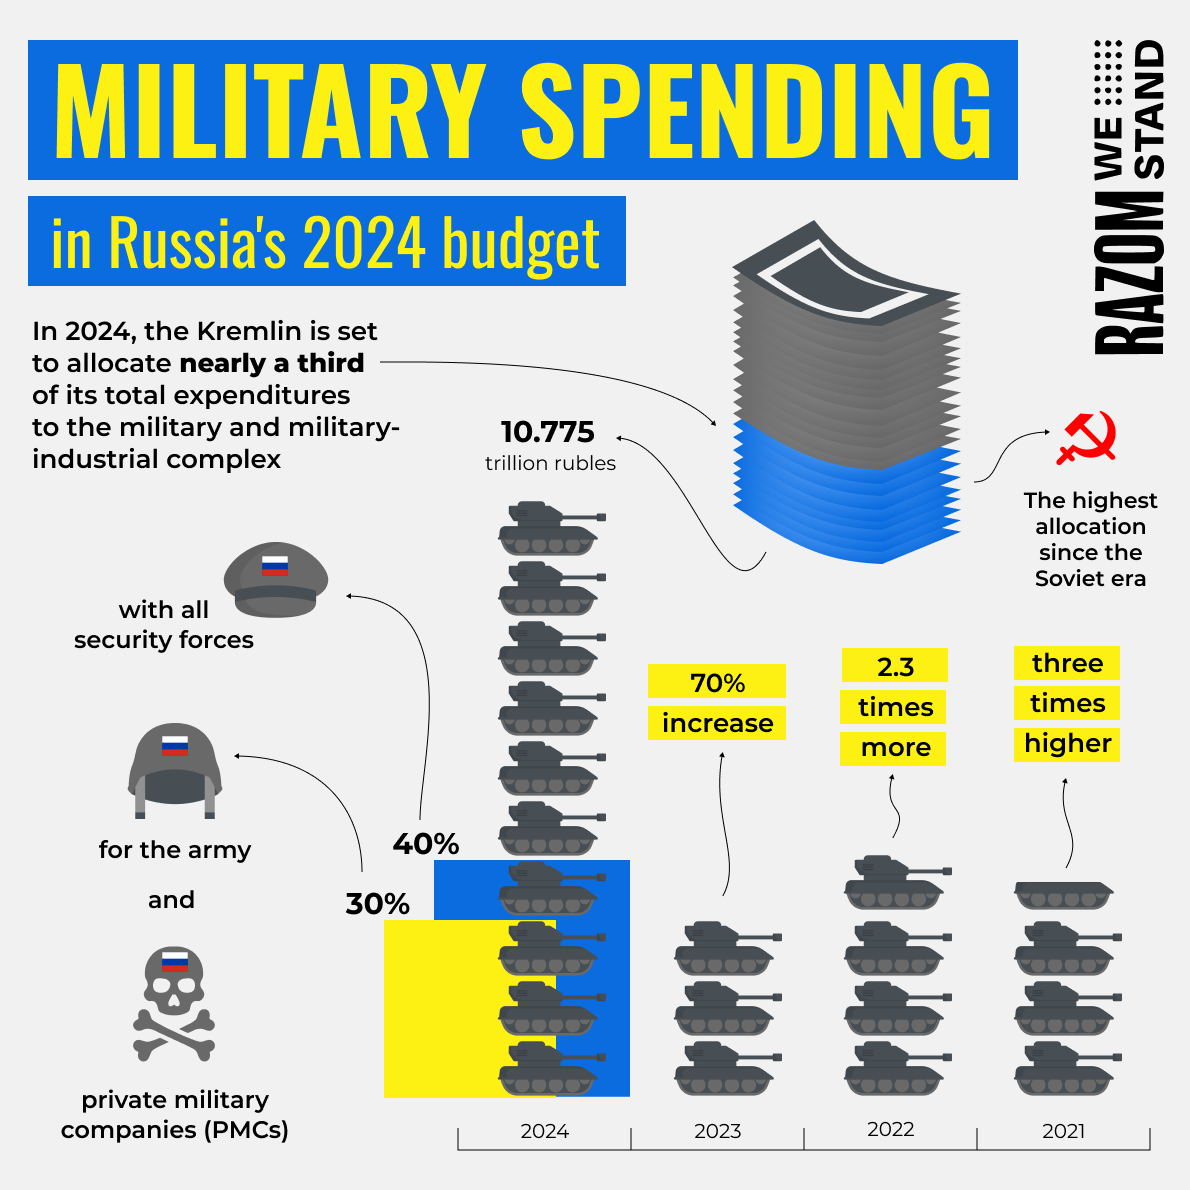 Military spending in Russia's 2024 budget